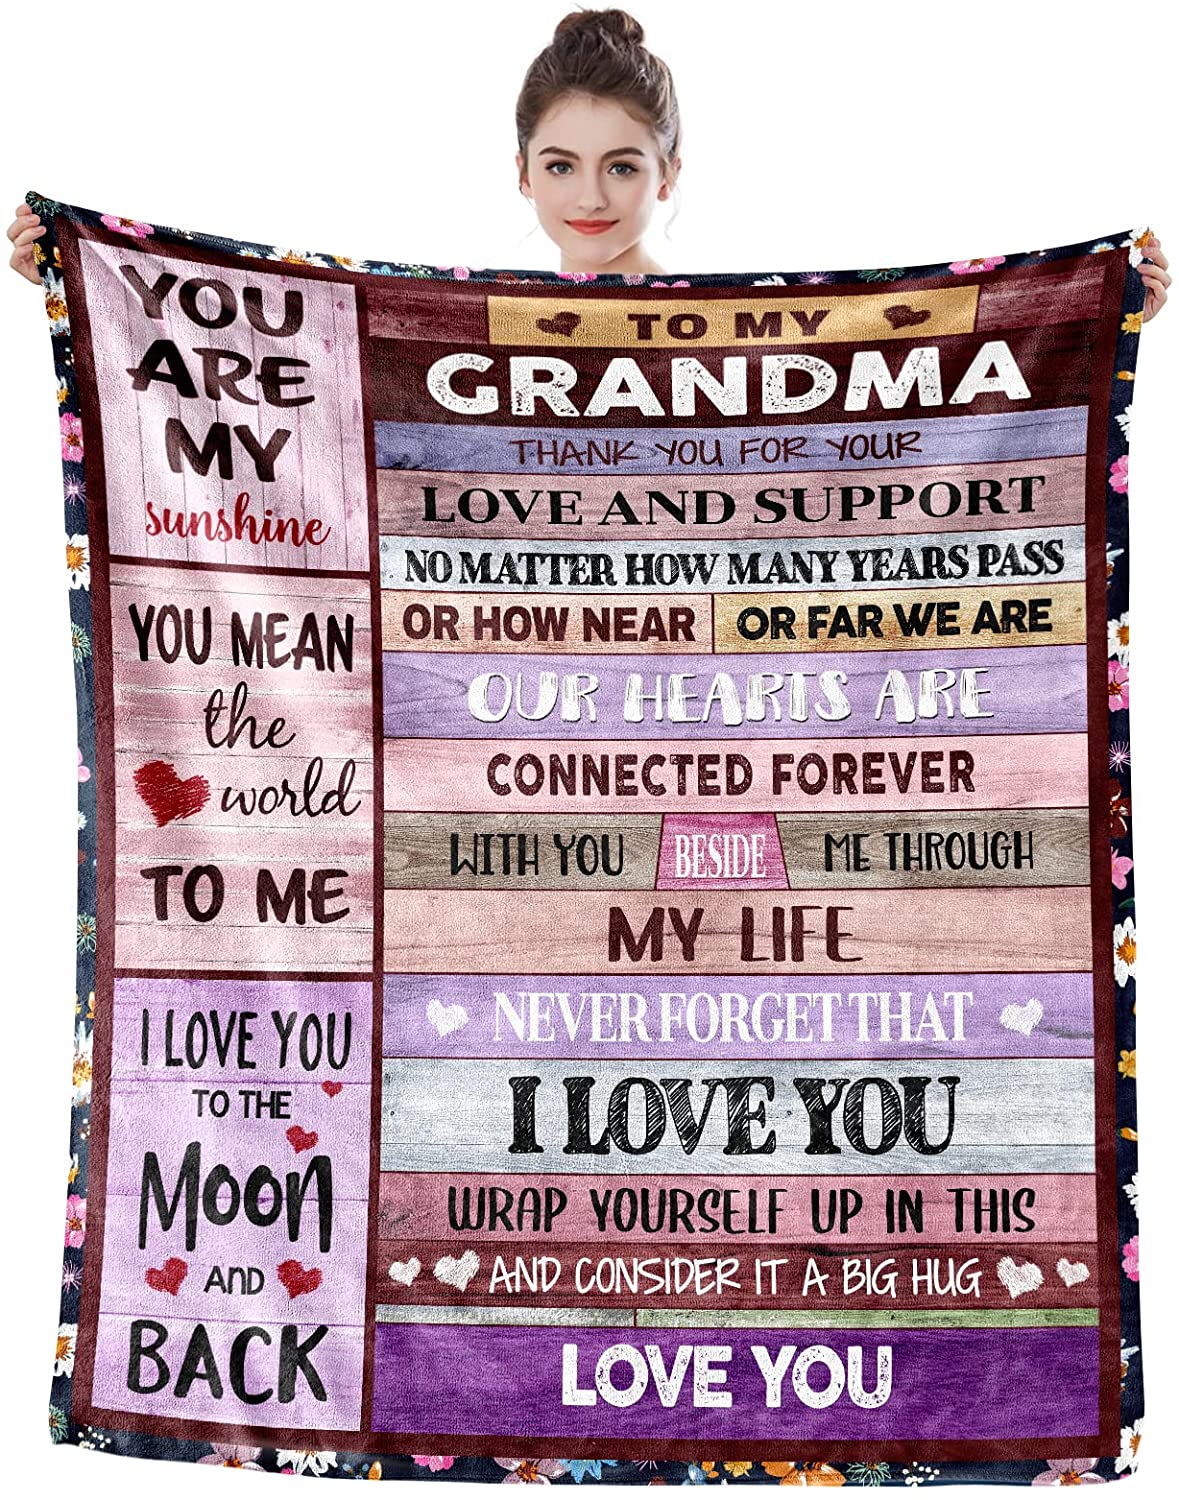 Gifts for Neighbors Blanket, Neighbor Gifts for Women - Printed Throw  Blanket for Neighbors, Best Neighbor Gifts for Christmas, Birthday,  Thanksgiving Day 50x60 Inches 